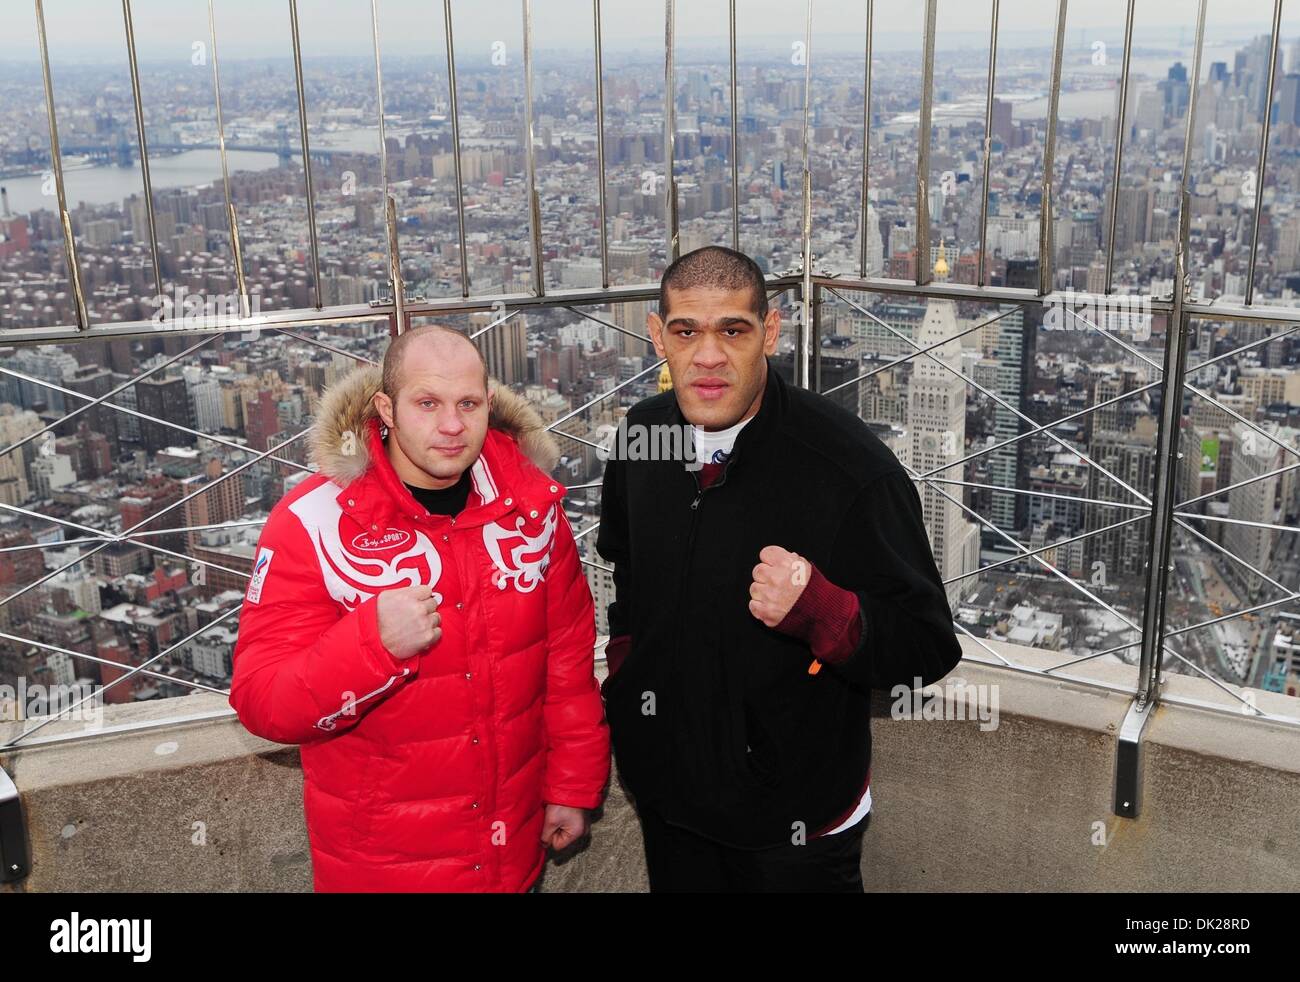 Feb. 9, 2011 - Manhattan, New York, U.S. - Strikeforce Mixed Martial Arts fighters FEDOR EMELIANENKO (L) also known as The Last Emperor and ANTONIO SILVA (R) also known as Bigfoot face off as they visit the Empire State Building's 86th floor observatory ahead of this Saturday's Strikeforce World Grand Prix at the Izod Center. (Credit Image: © Bryan Smith/ZUMAPRESS.com) Stock Photo